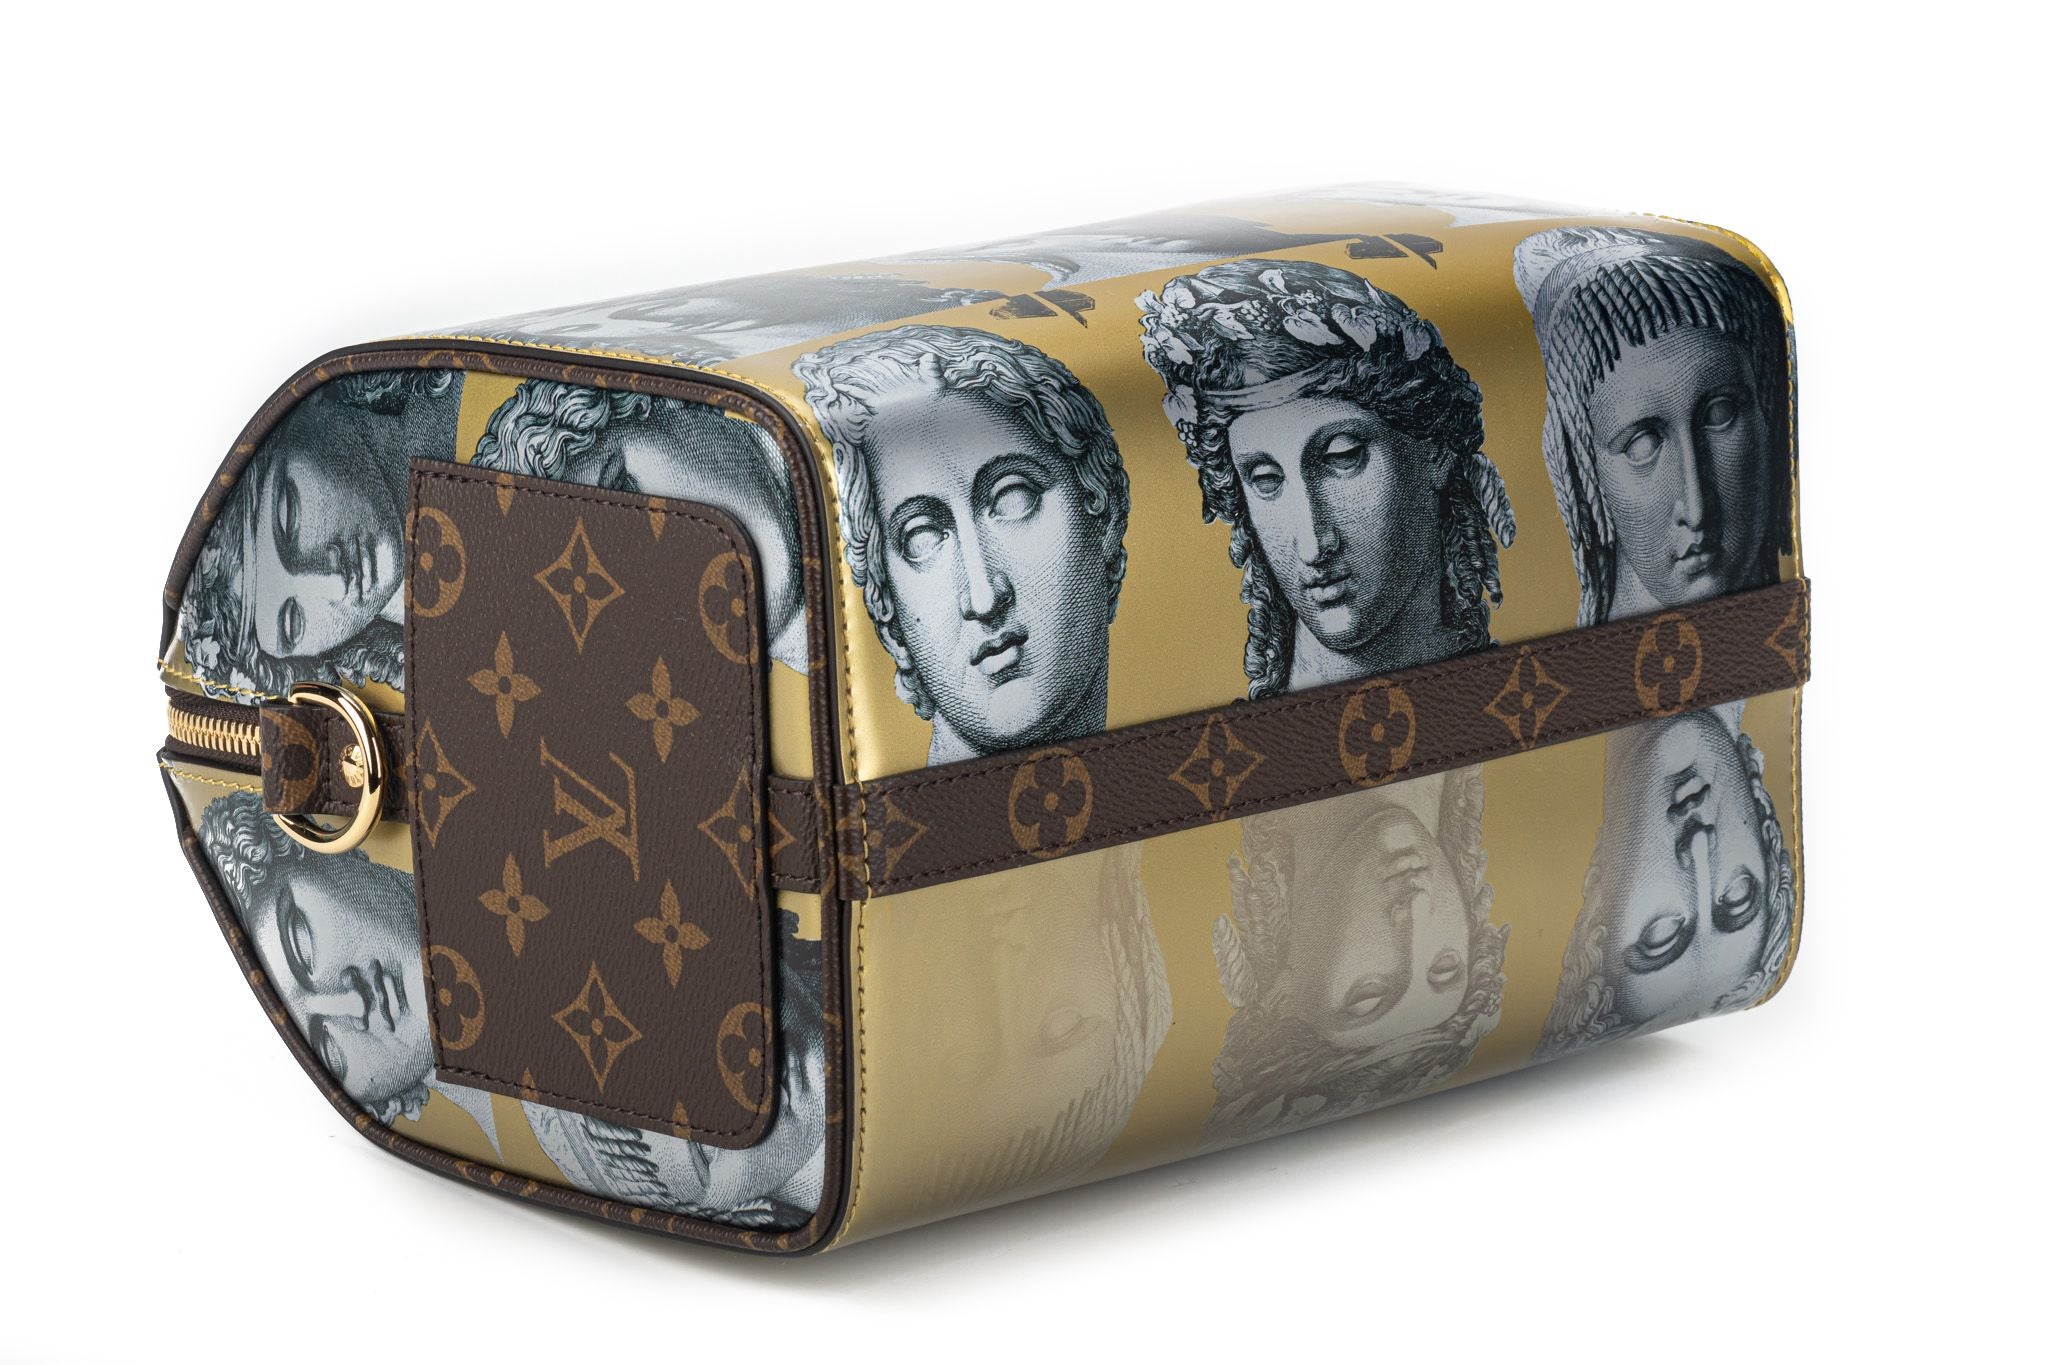 BRAND NEW-Limited edition Louis Vuitton Speedy 25 strap Fornasetti fw21